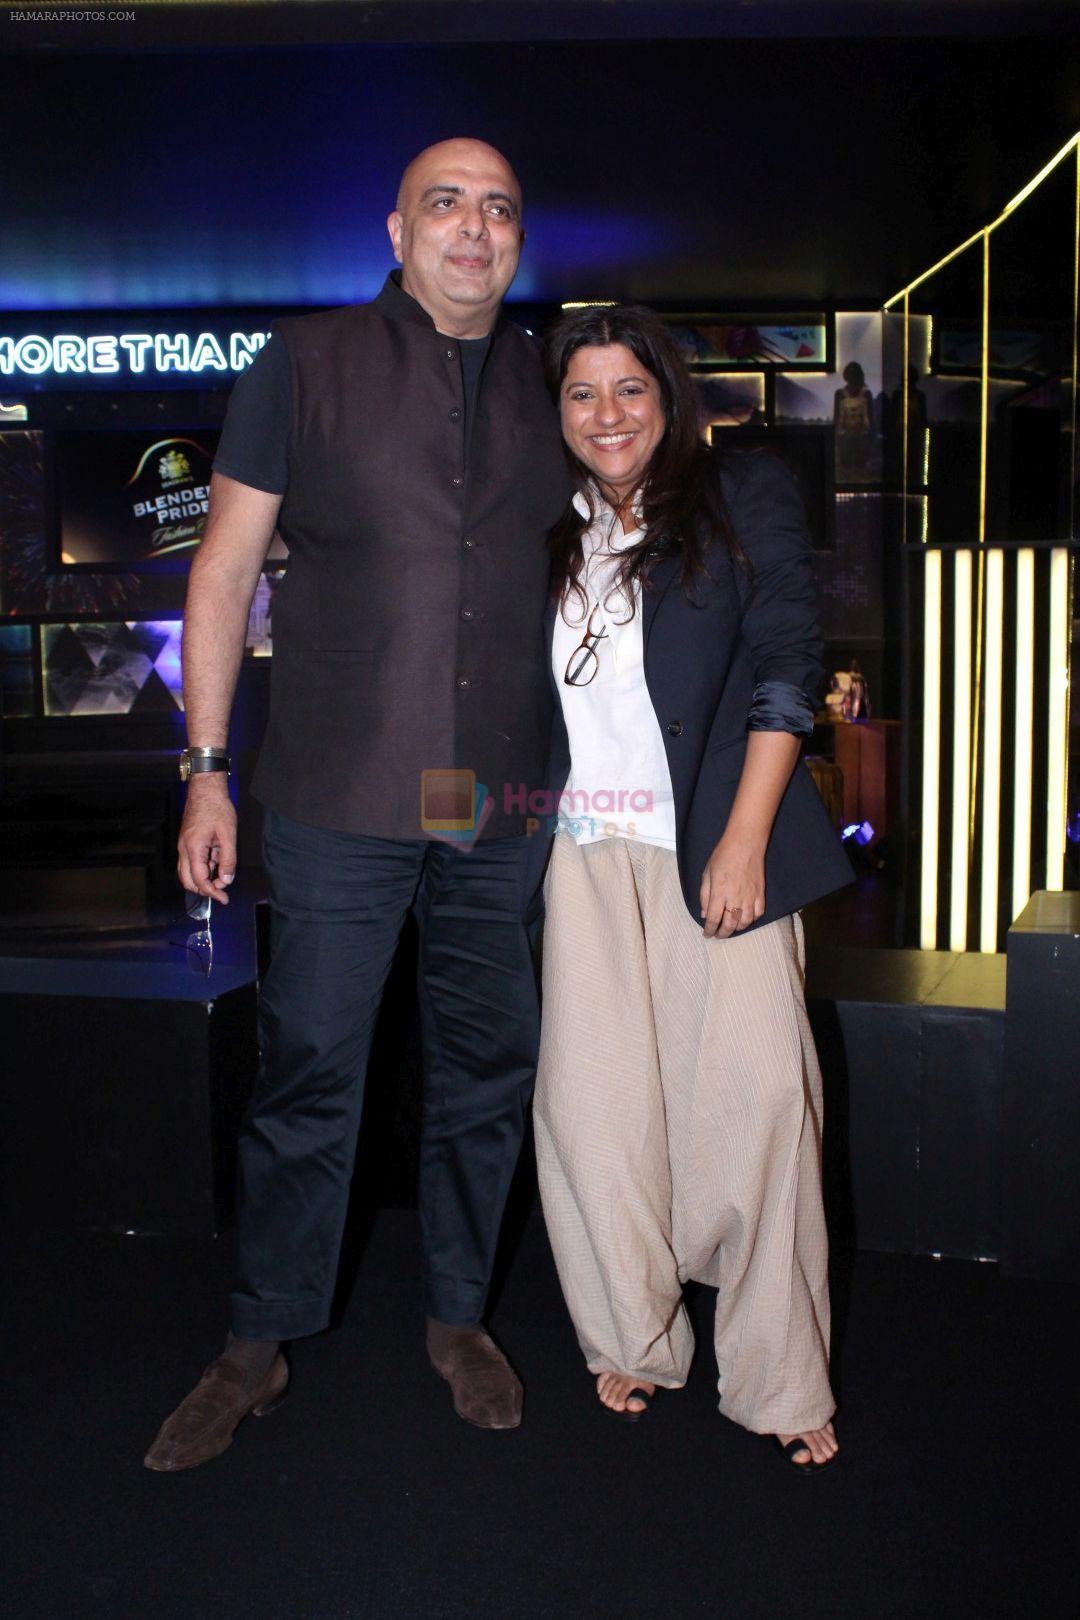 Zoya Akhtar, Tarun Tahiliani at The Preview of Blenders Pride Fashion Tour 2017 on 5th Oct 2017